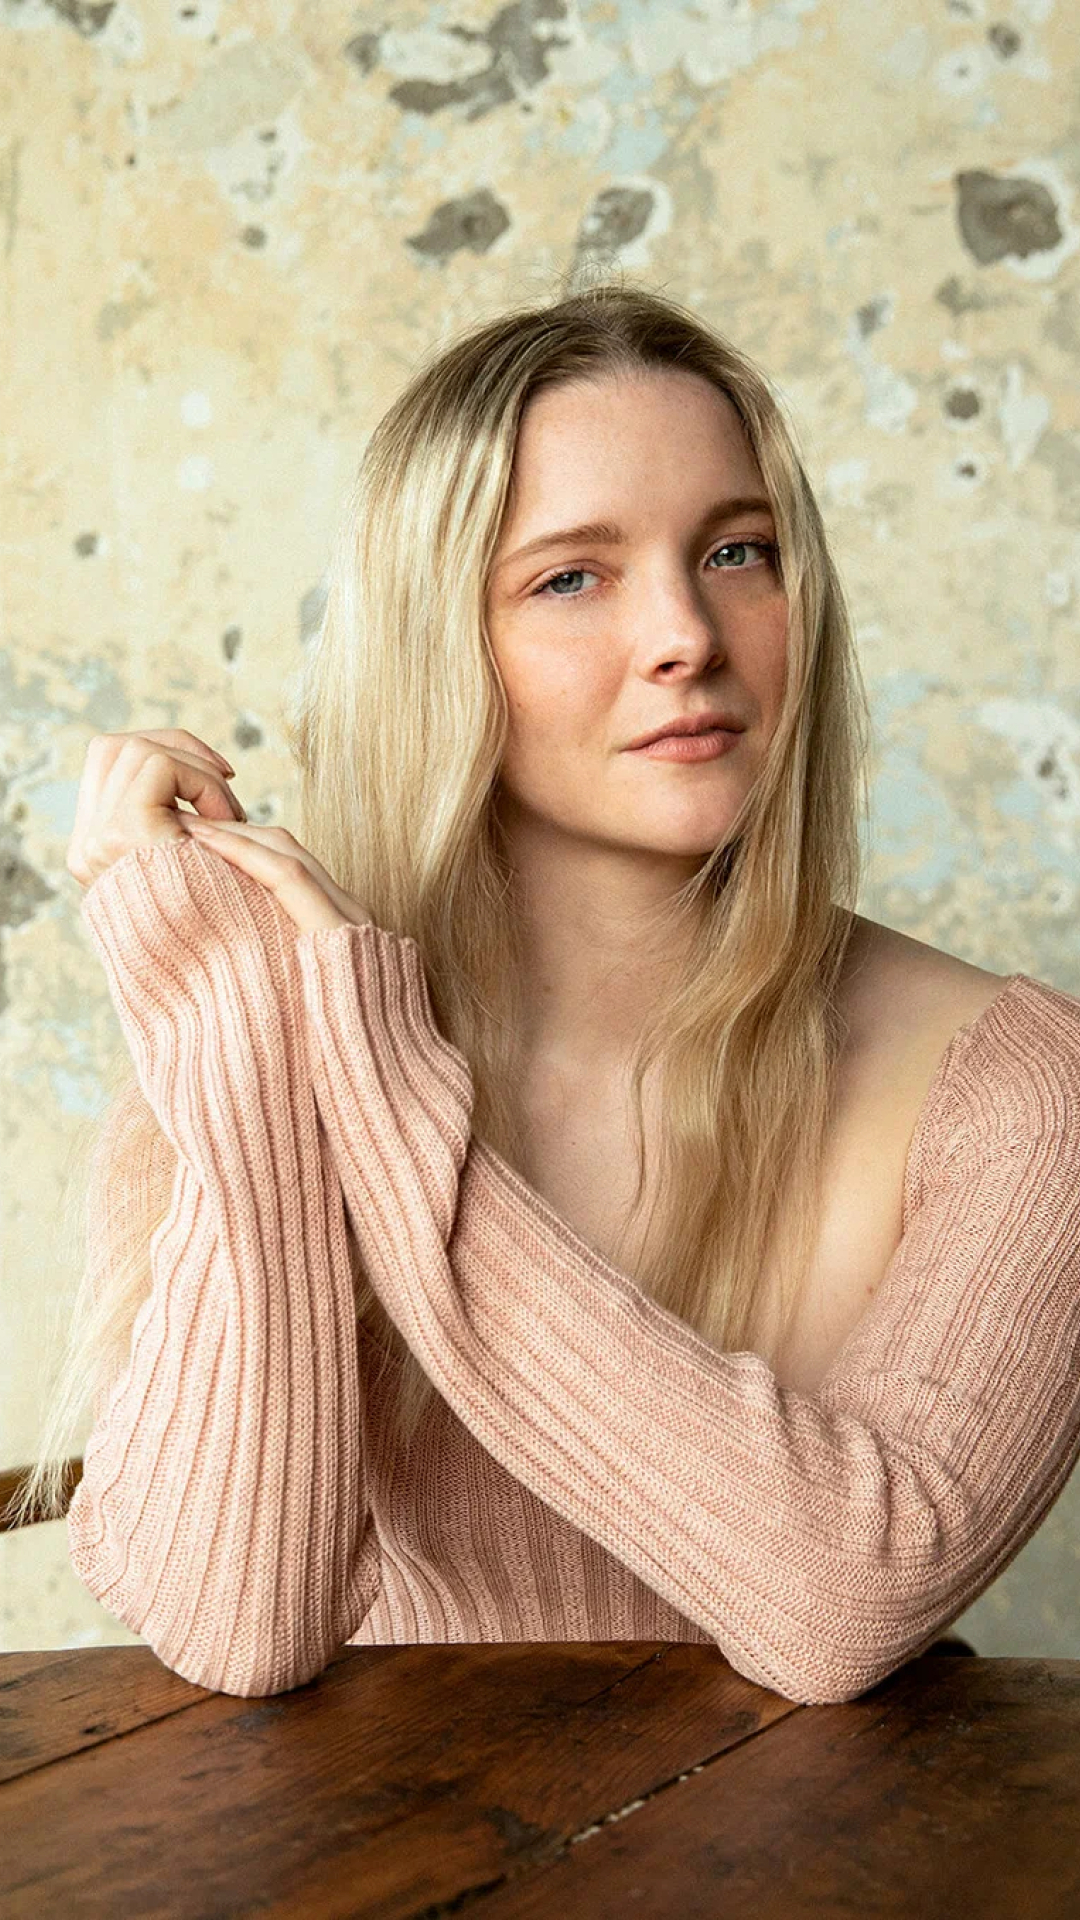 1080x1920 Resolution Morfydd Clark Photoshoot 2022 Iphone 7 6s 6 Plus And Pixel Xl One Plus 3